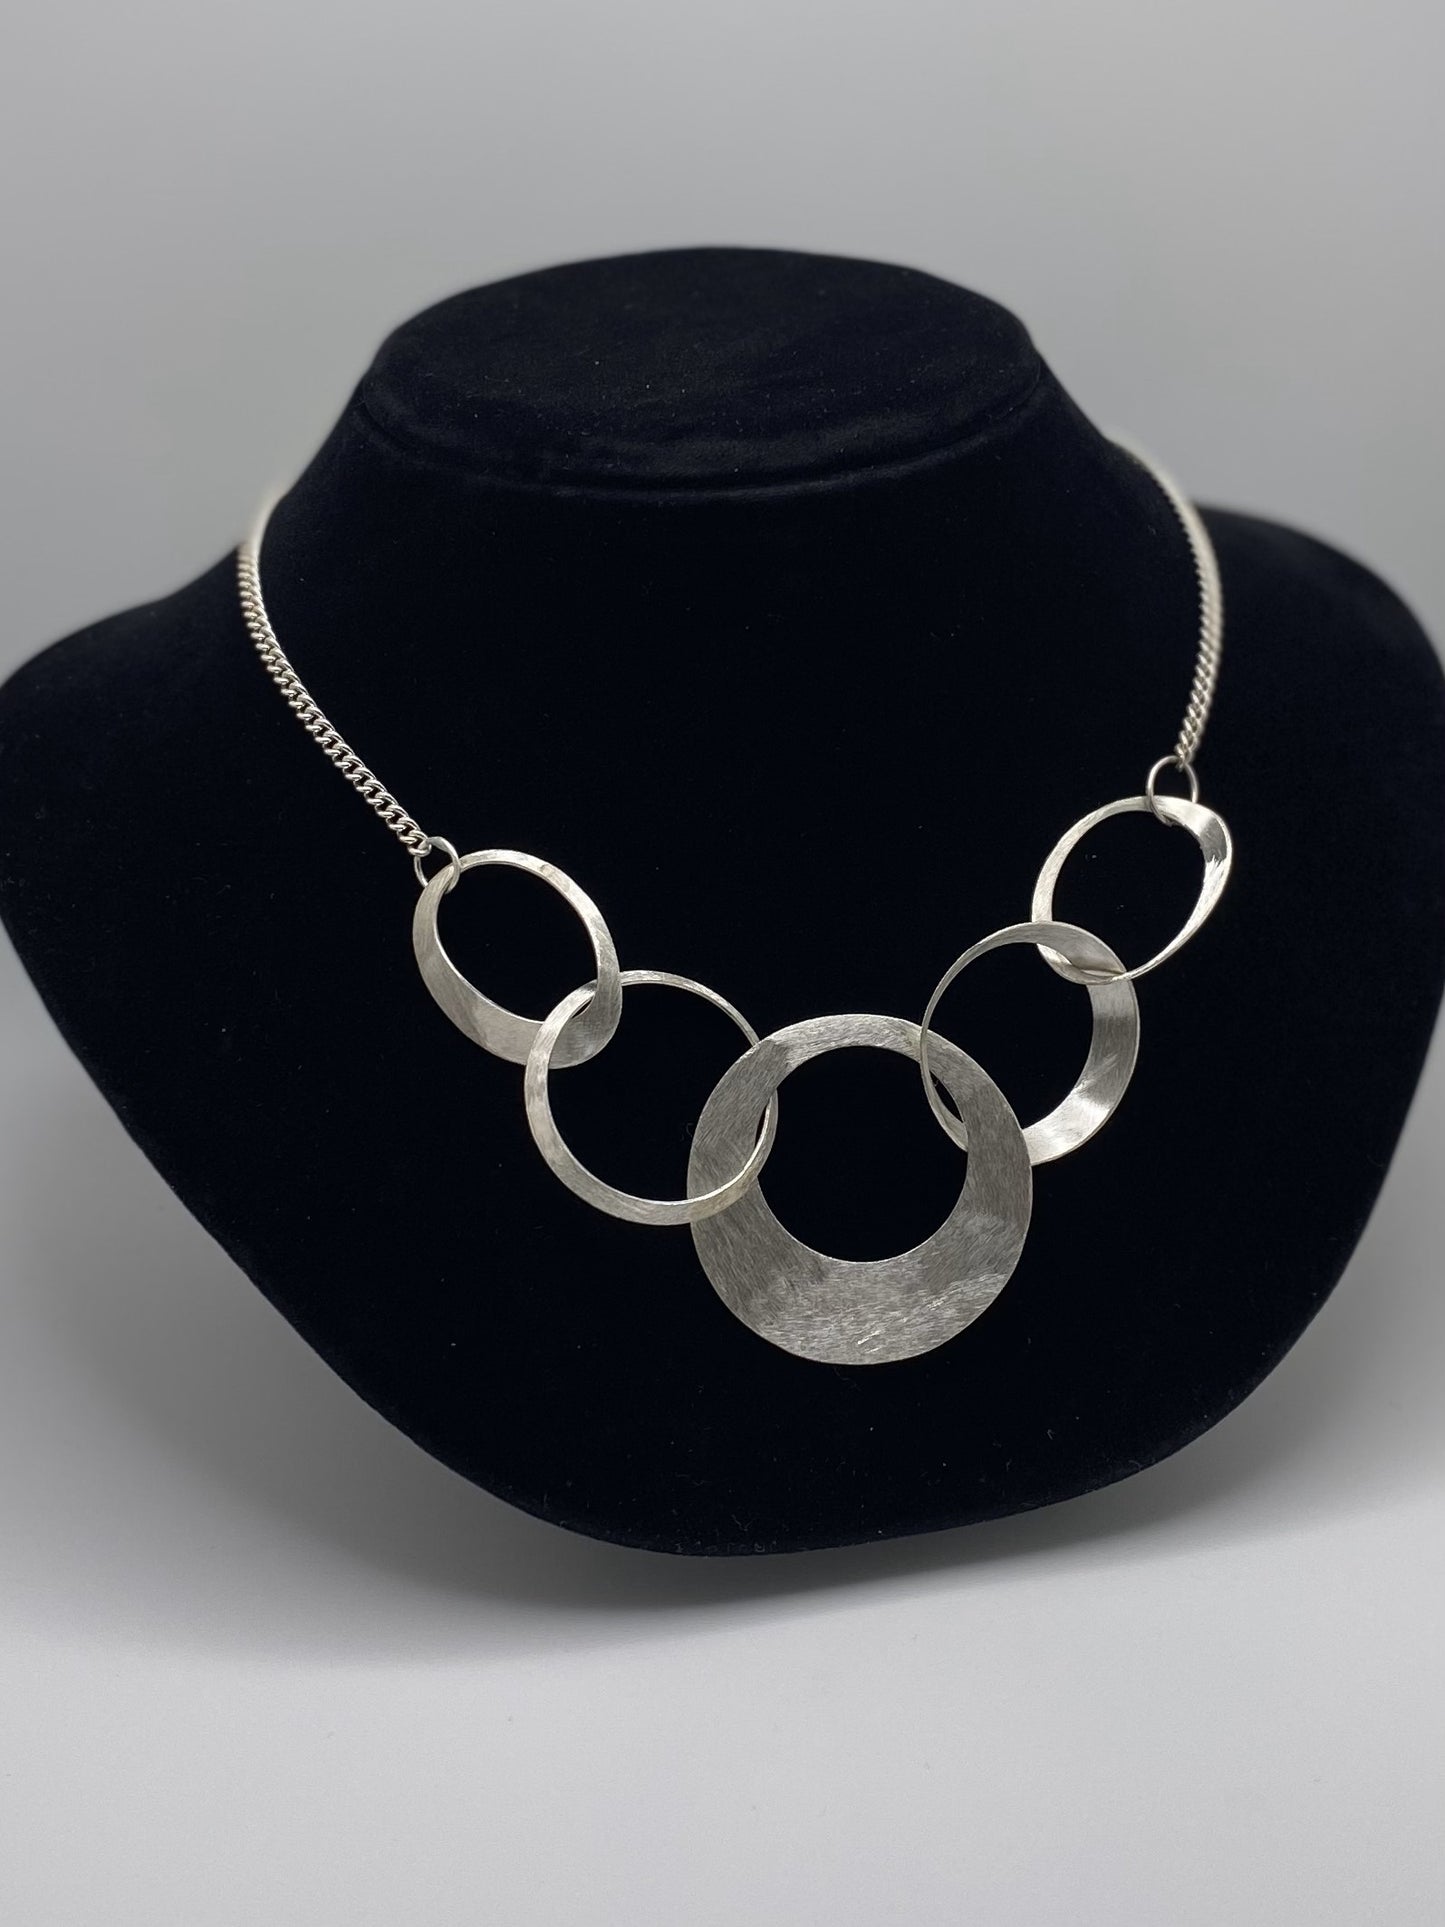 Five Circles handmade Necklace with Sterling Silver Round & Oval Shapes